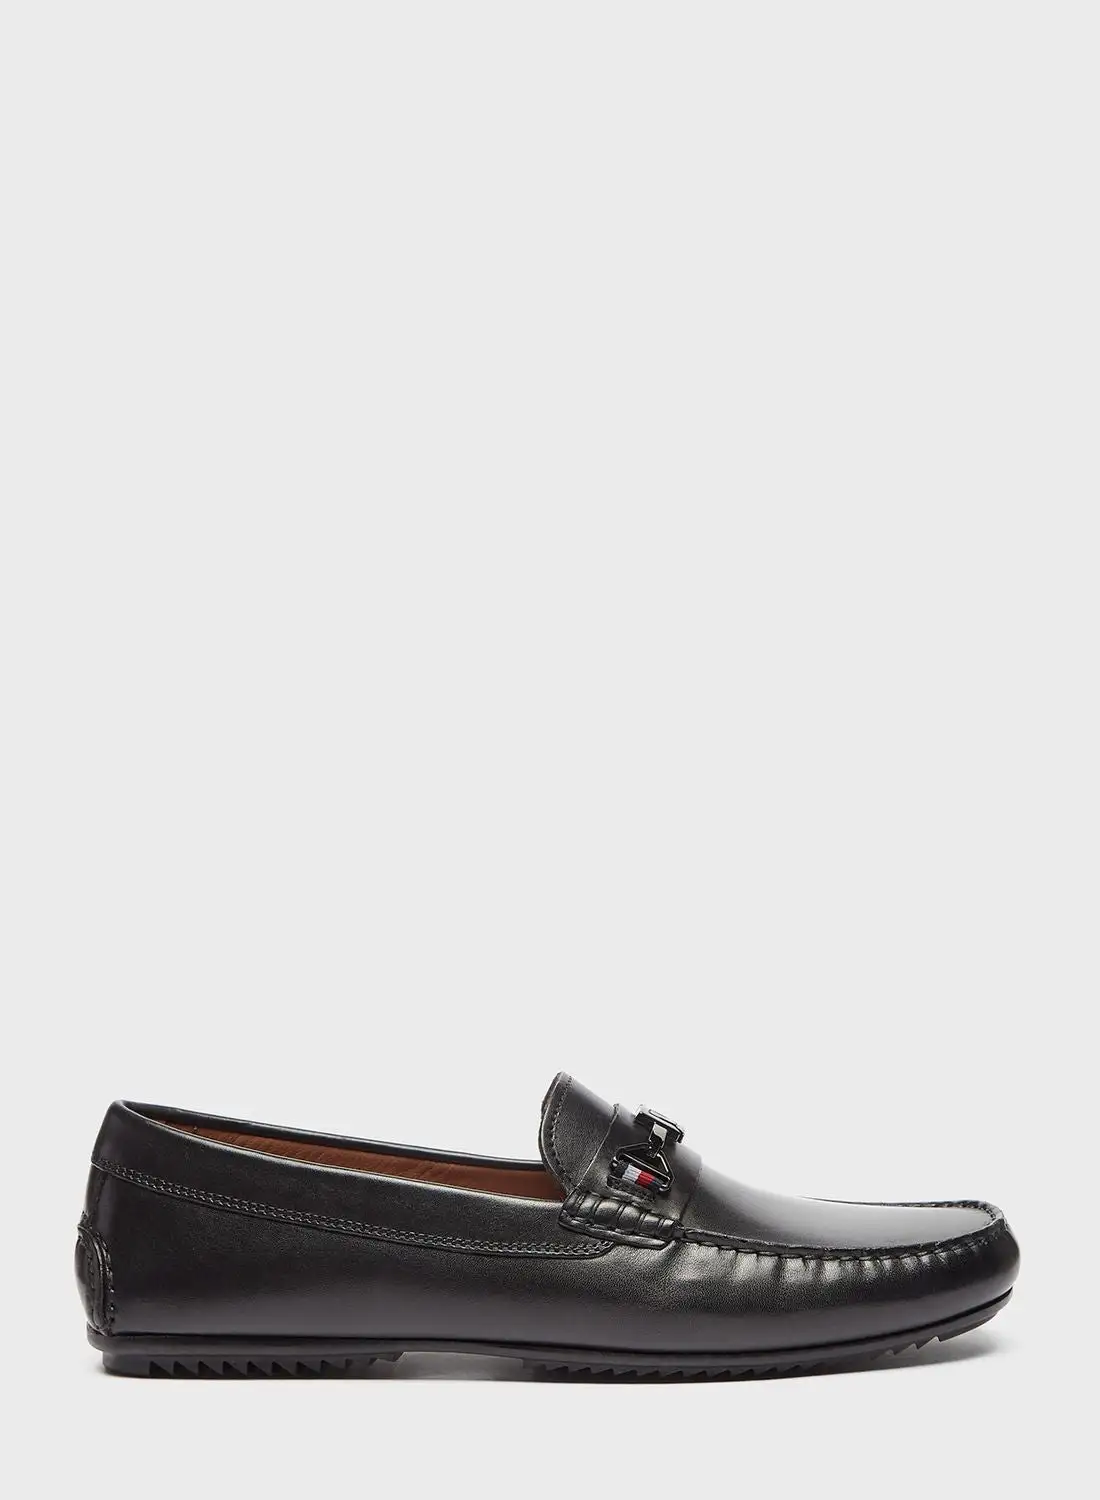 DUCHINI Casual Slip Ons Loafers